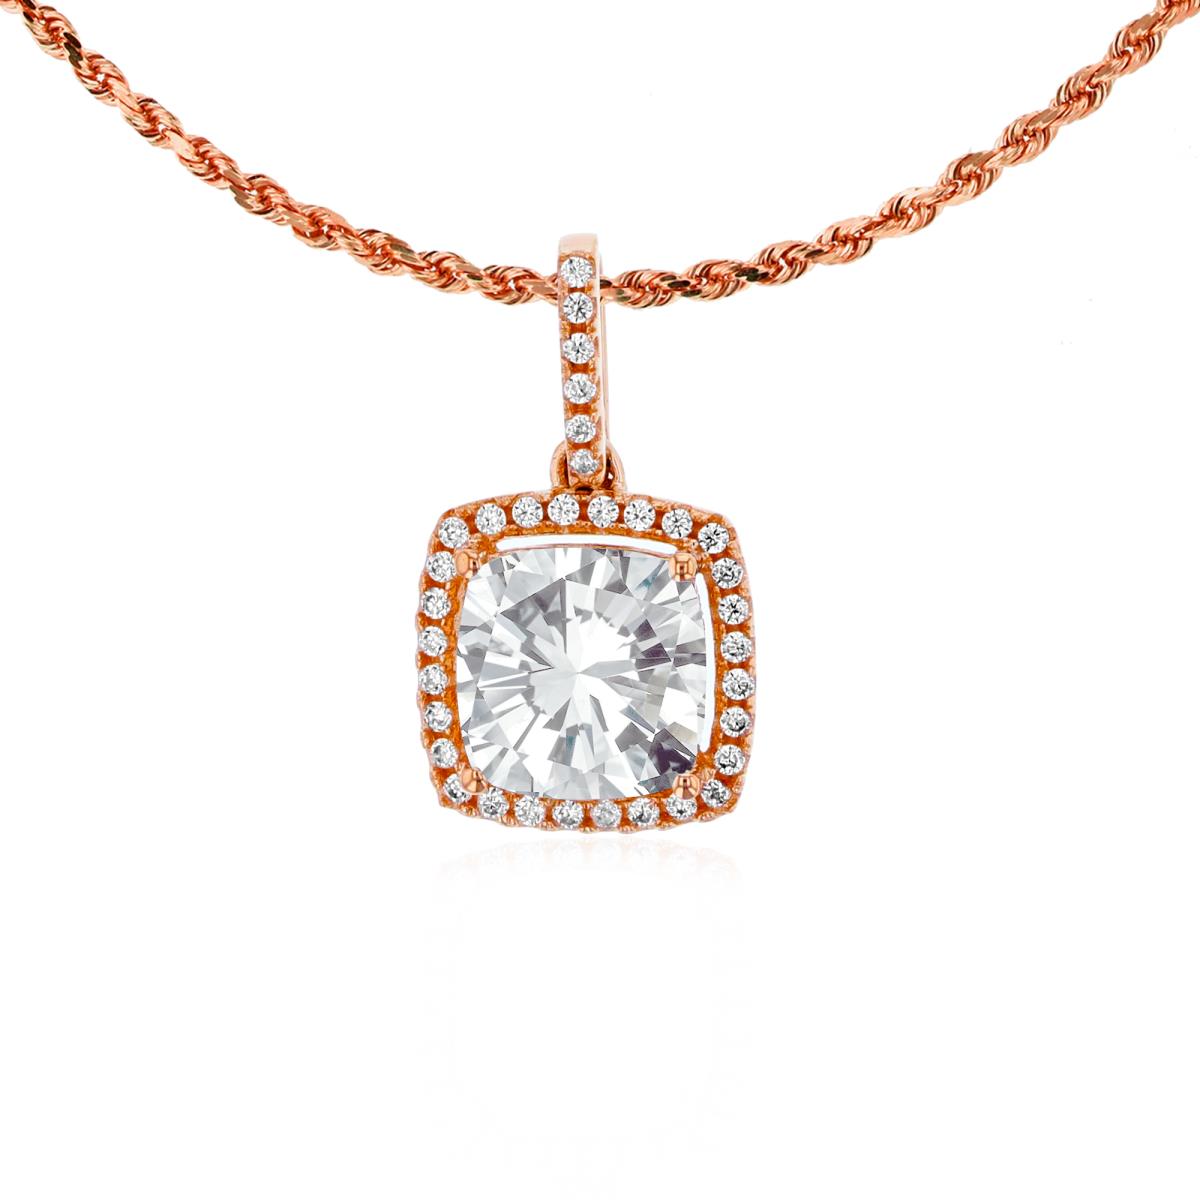 10K Rose Gold 7mm Cushion White Topaz & 0.14 CTTW Rnd Diamond Halo 18" Rope Chain Necklace